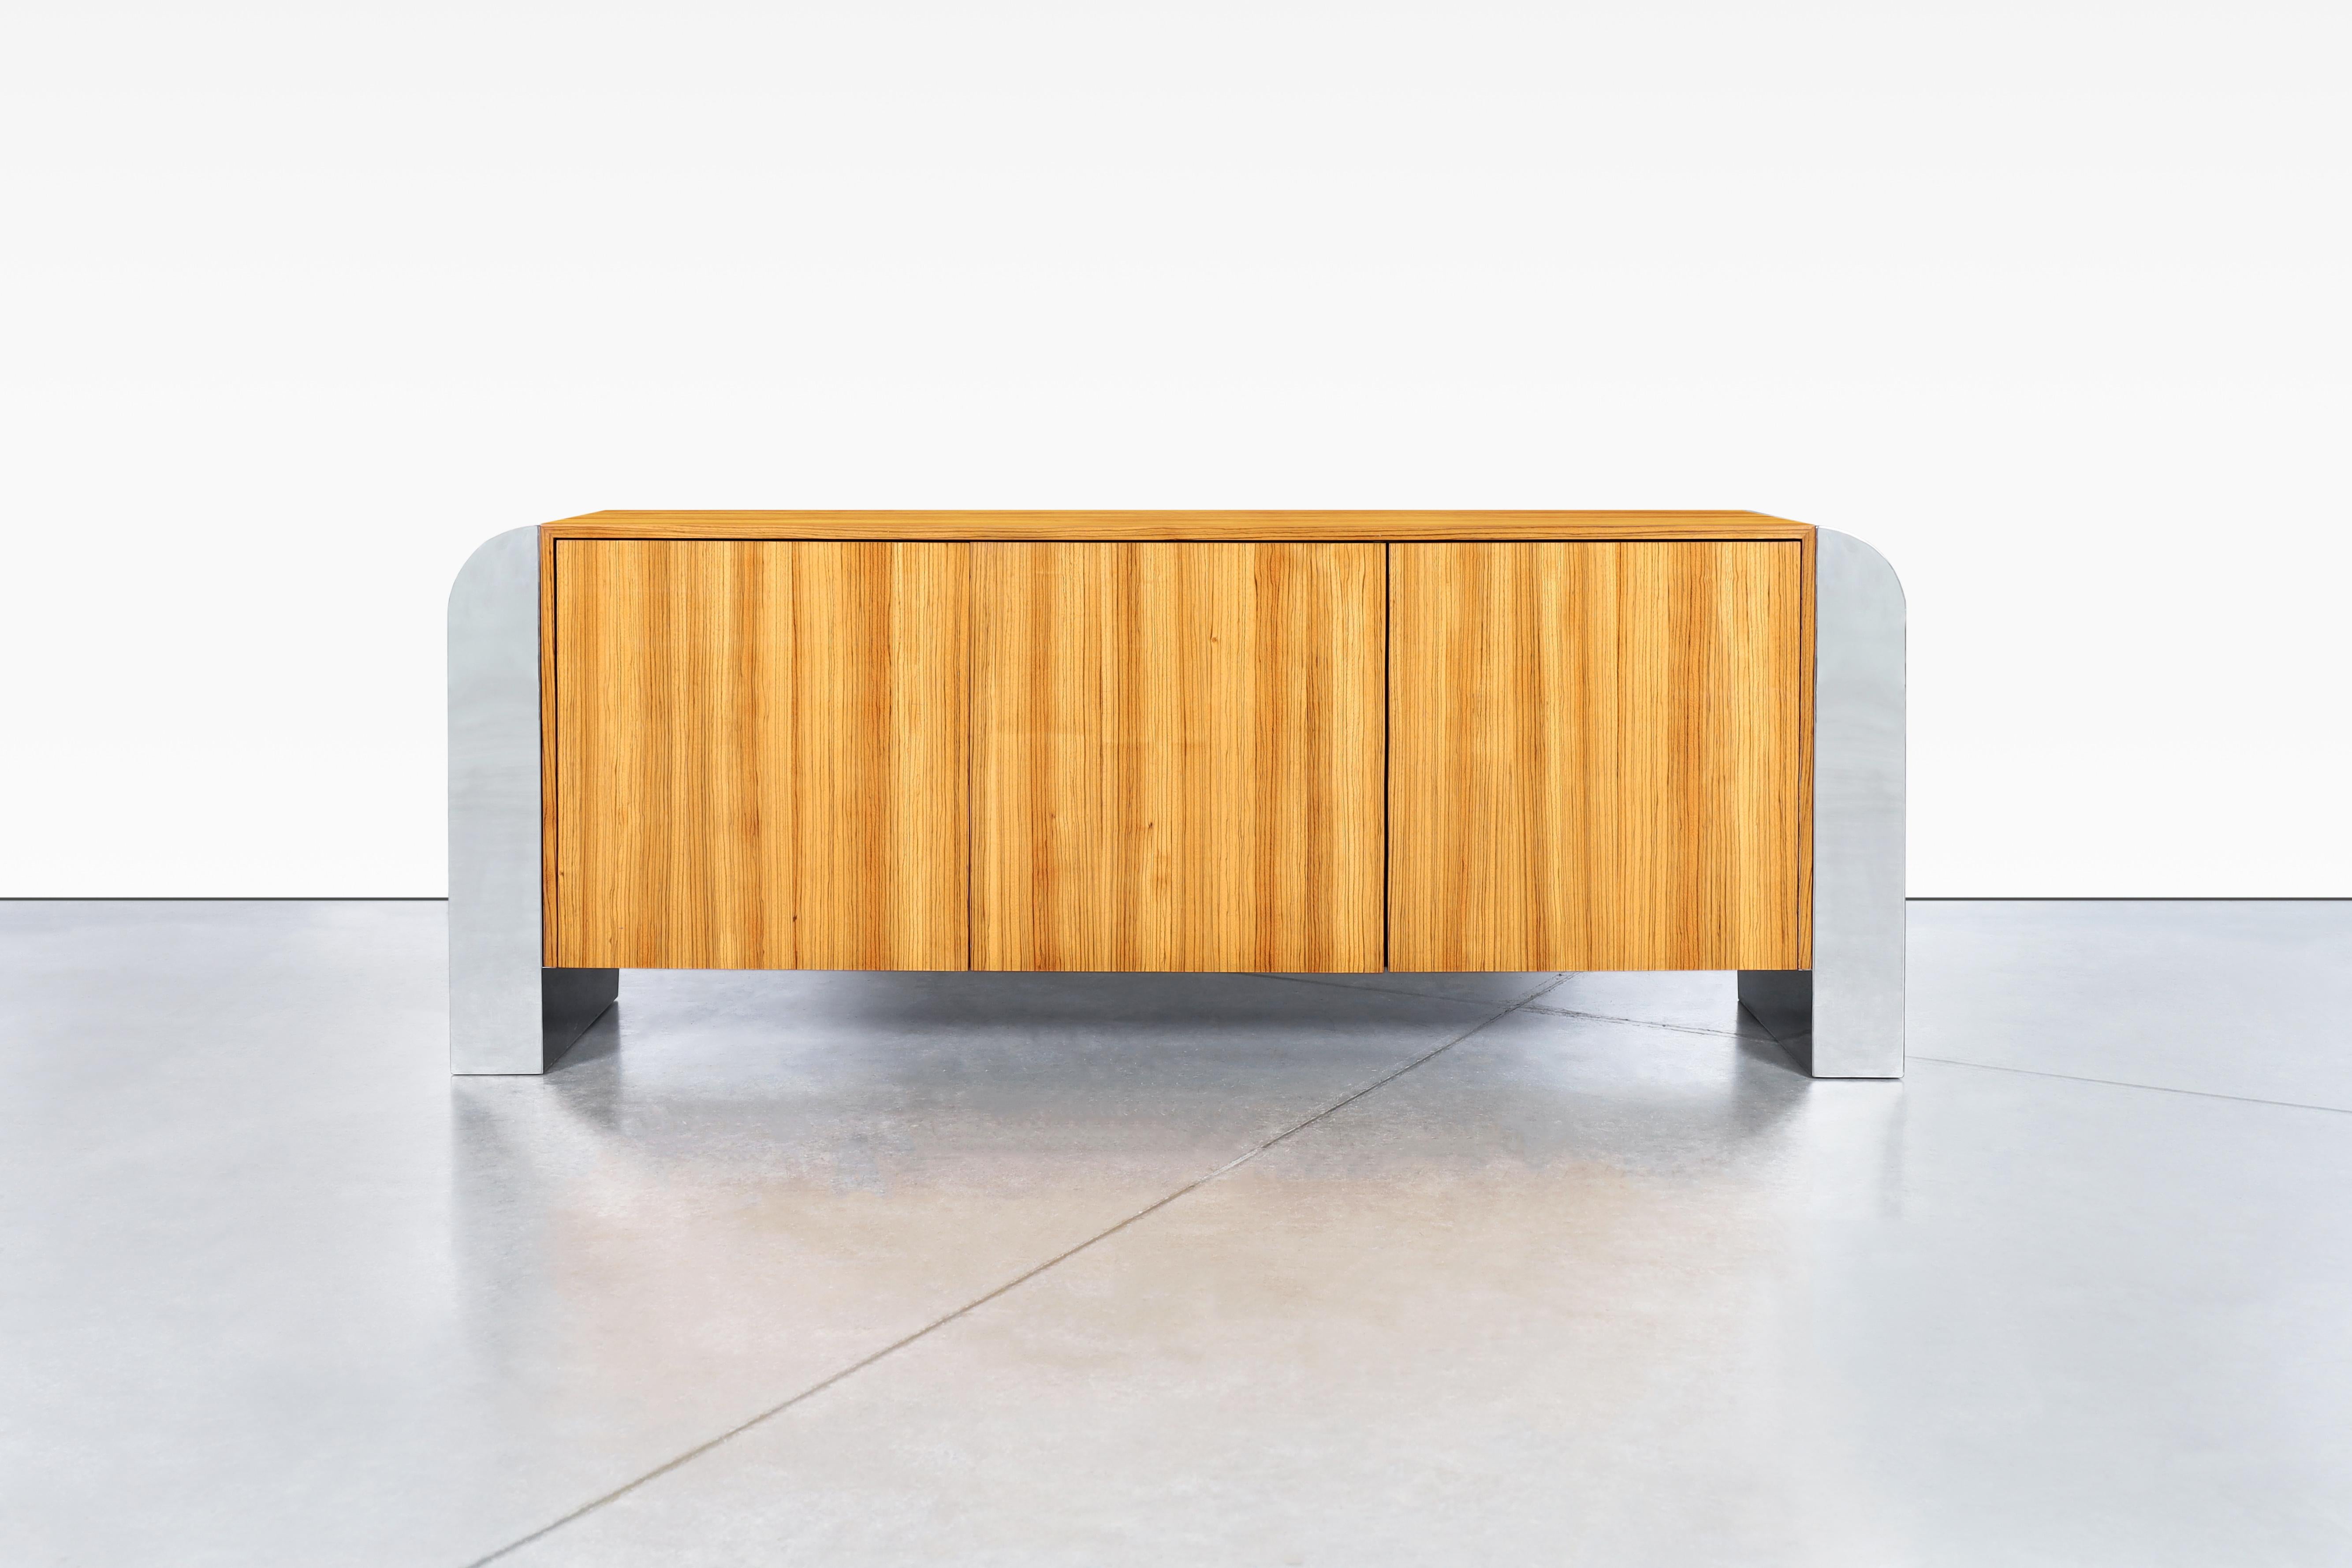 This stunning credenza is a testament to the exquisite craftsmanship and unique design sensibility of John Mascheroni. The piece, which dates back to the 1970s, is crafted from exotic zebra wood sourced from central Africa, giving it a one-of-a-kind